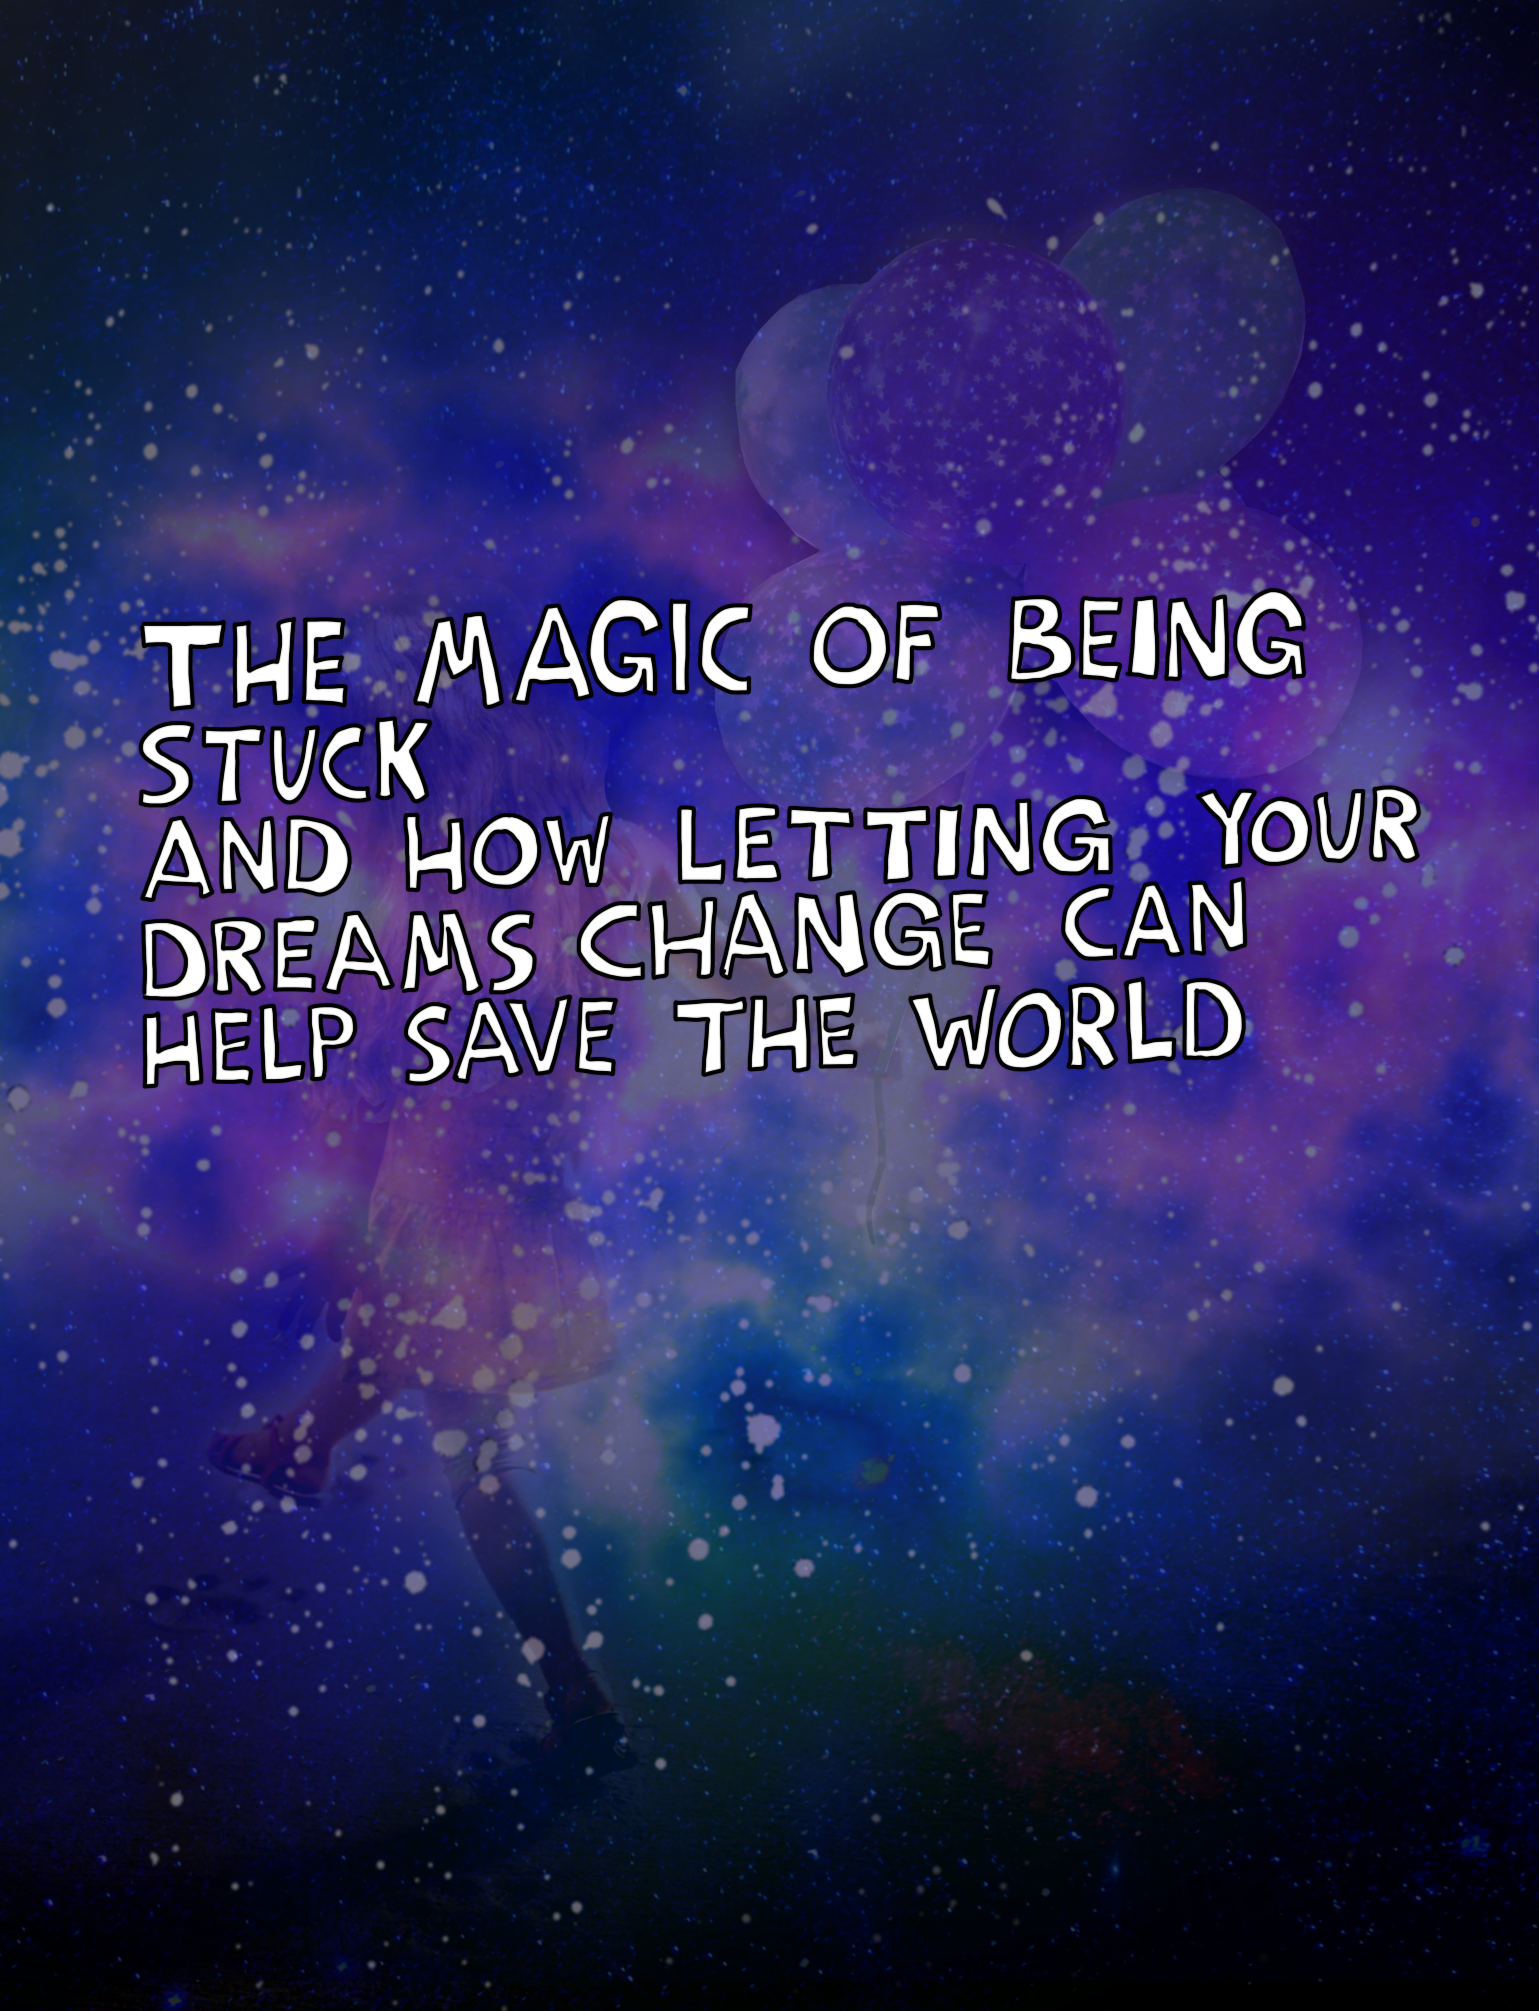 The magic of being stuck, and how letting your dreams change can help save the world.